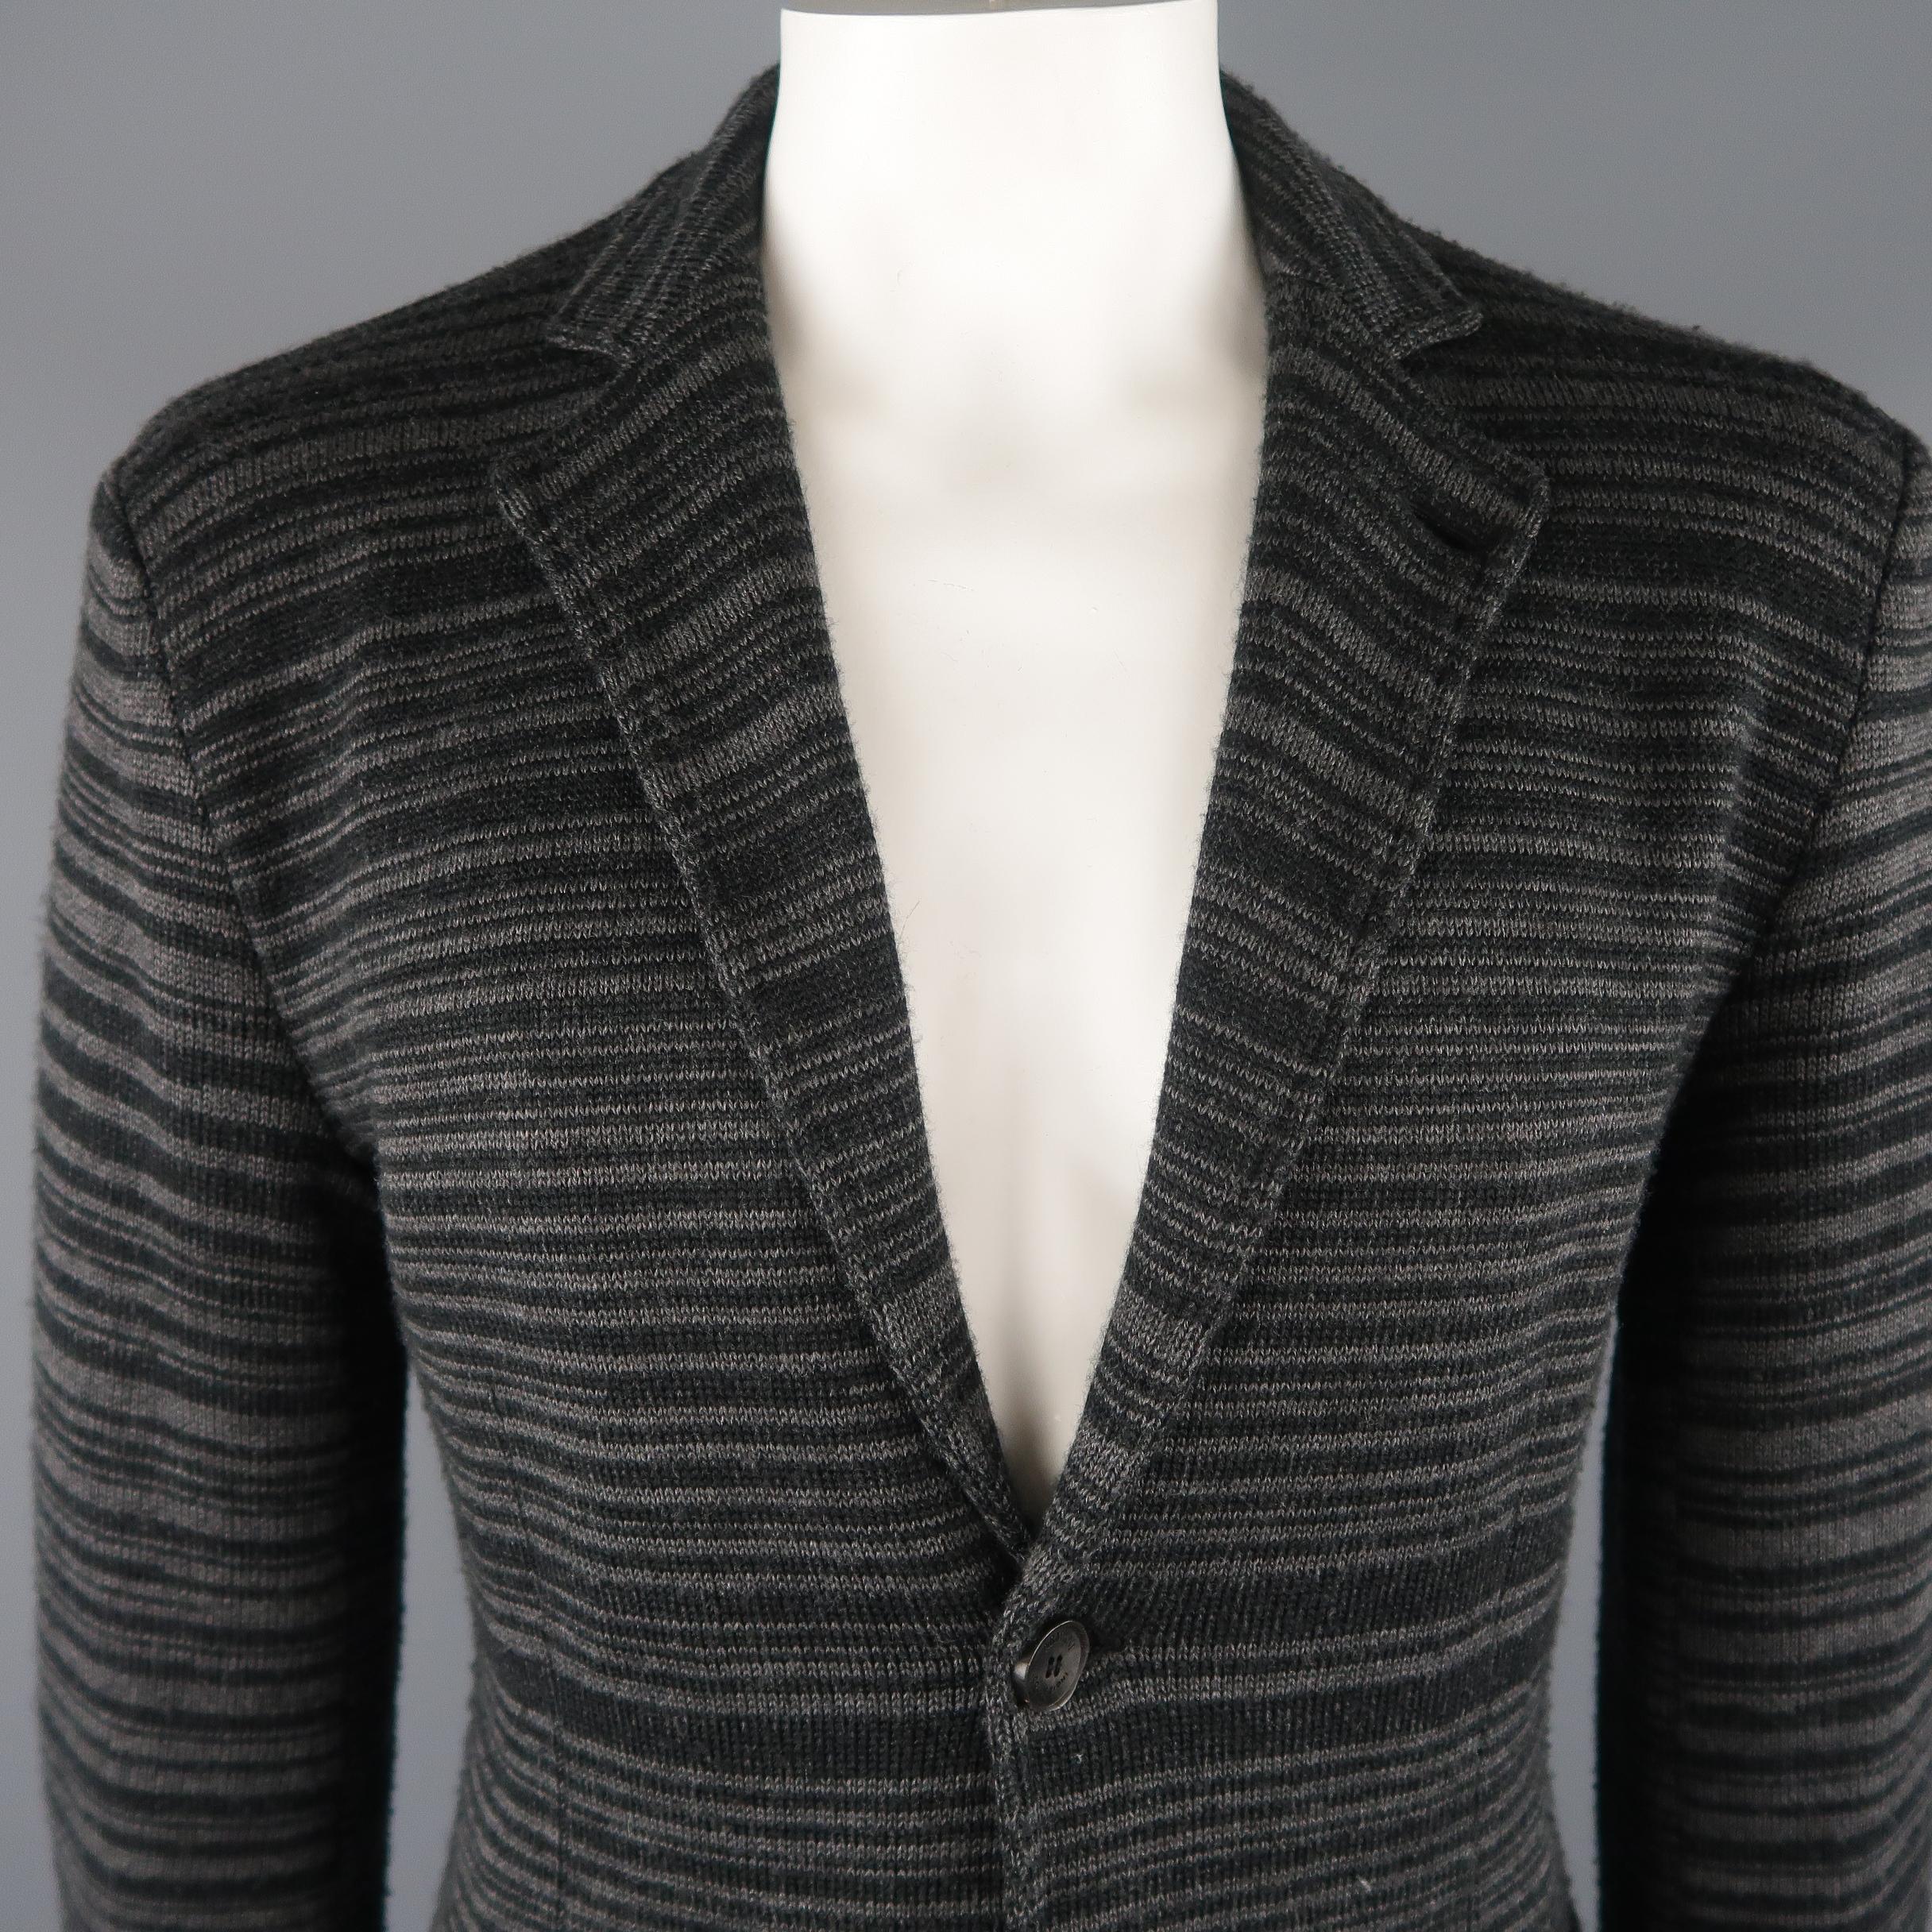 ARMANI COLLEZIONI sport coat comes in black and gray tones in stripped knitted wool blend material, with a notch lapel, 2 buttons closure, single breasted, slit pockets, unlined. Made in Italy.
 
Excellent Pre-Owned Condition.
Marked: No size
